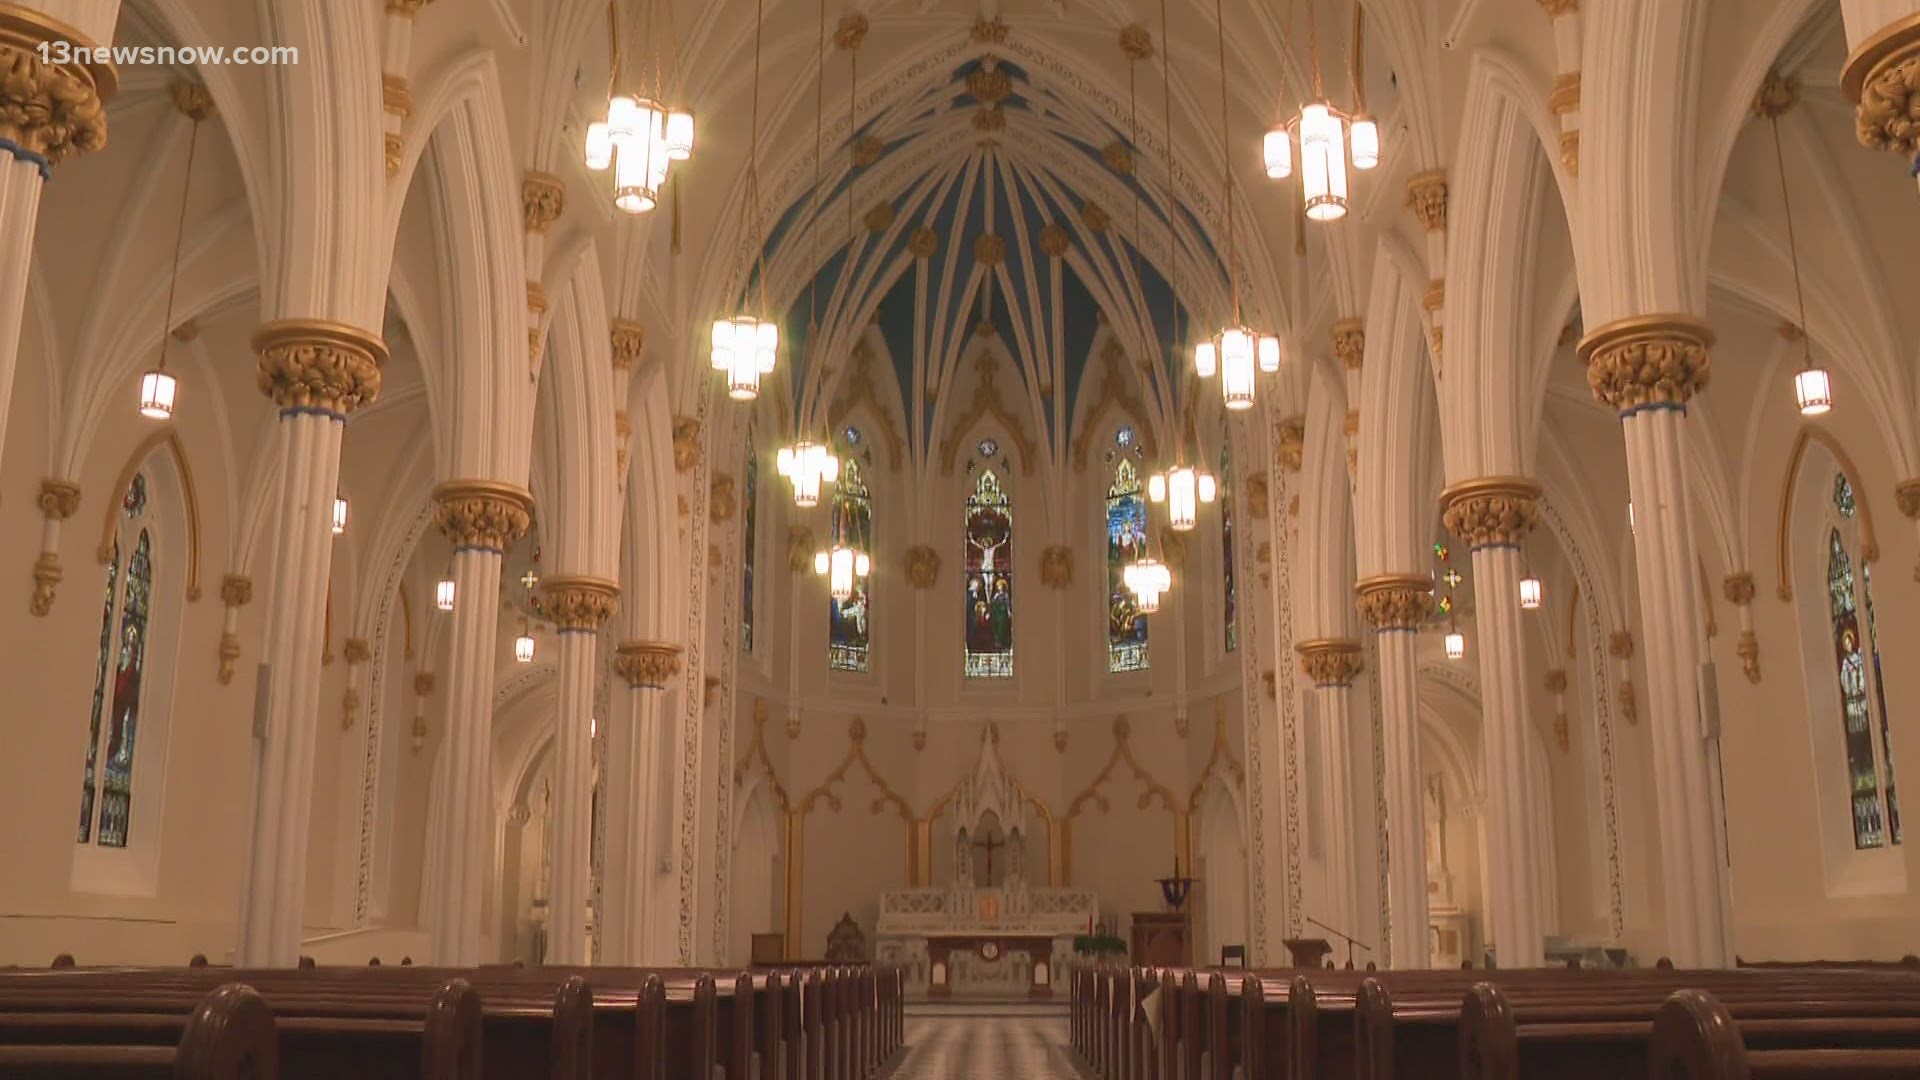 Renovations are nearly complete at the Basilica of Saint Mary of the Immaculate Conception in Norfolk.